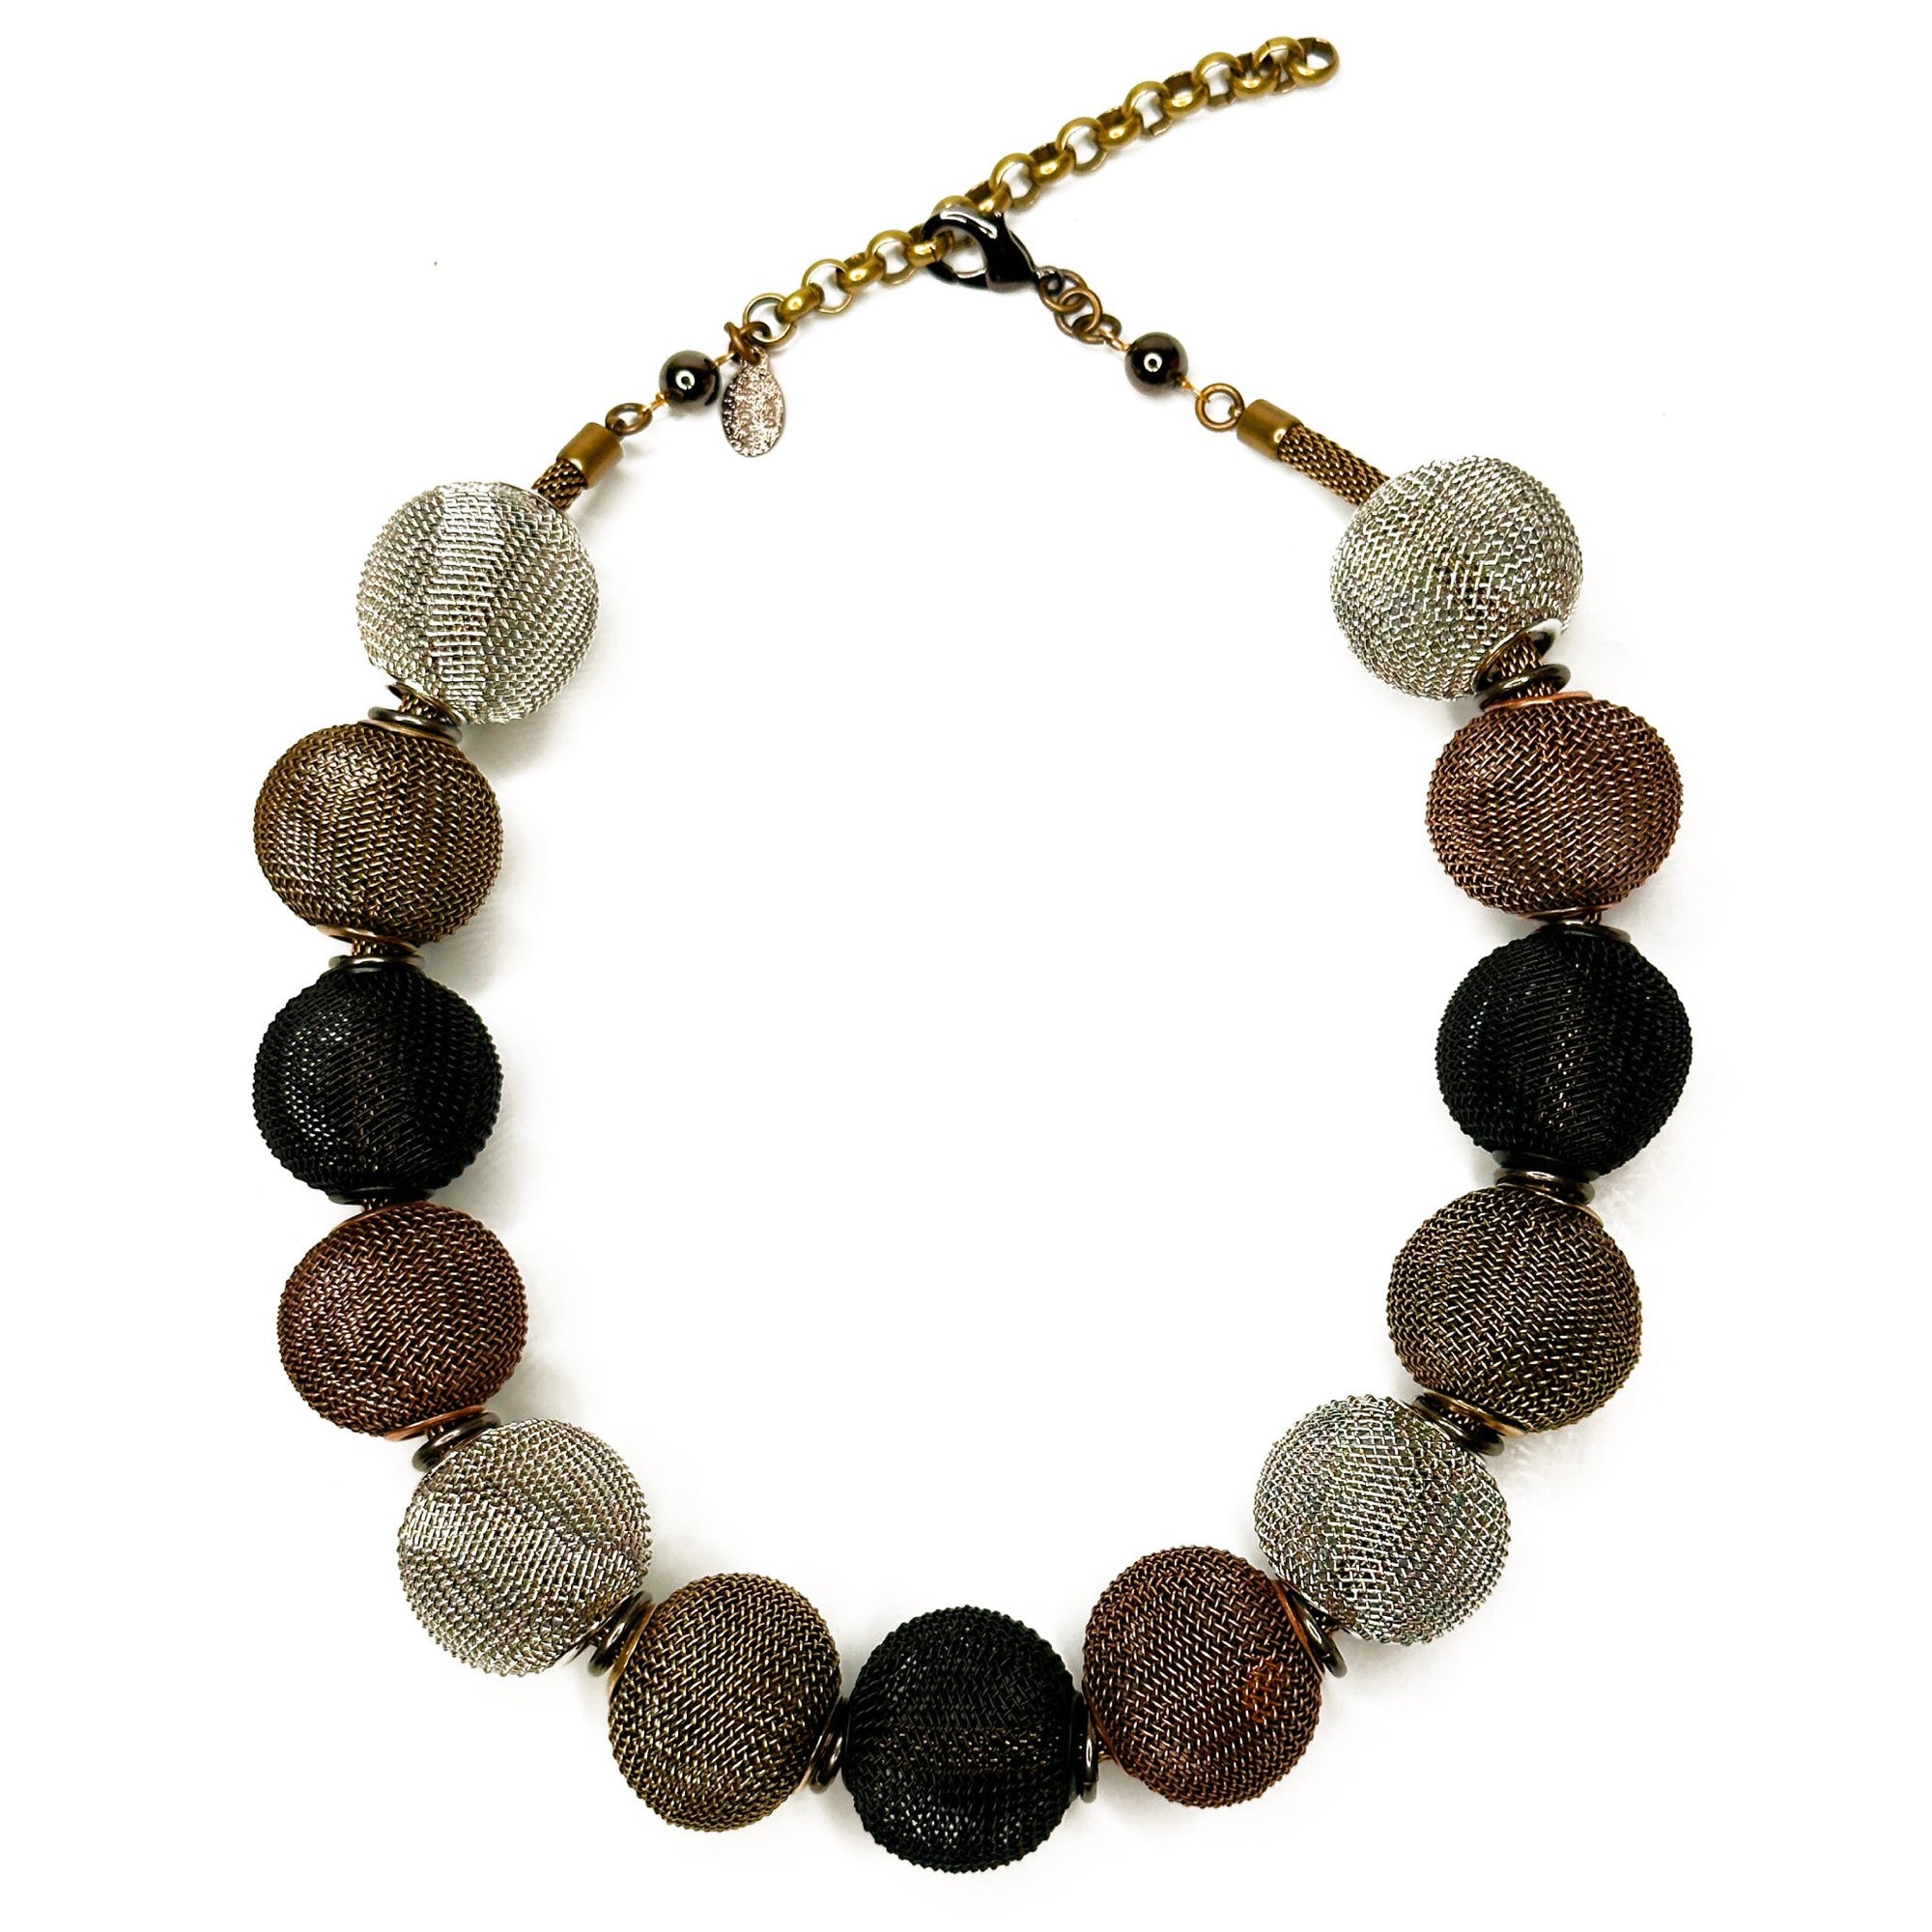 Mesh Necklace with All-Around Large Mesh Beads